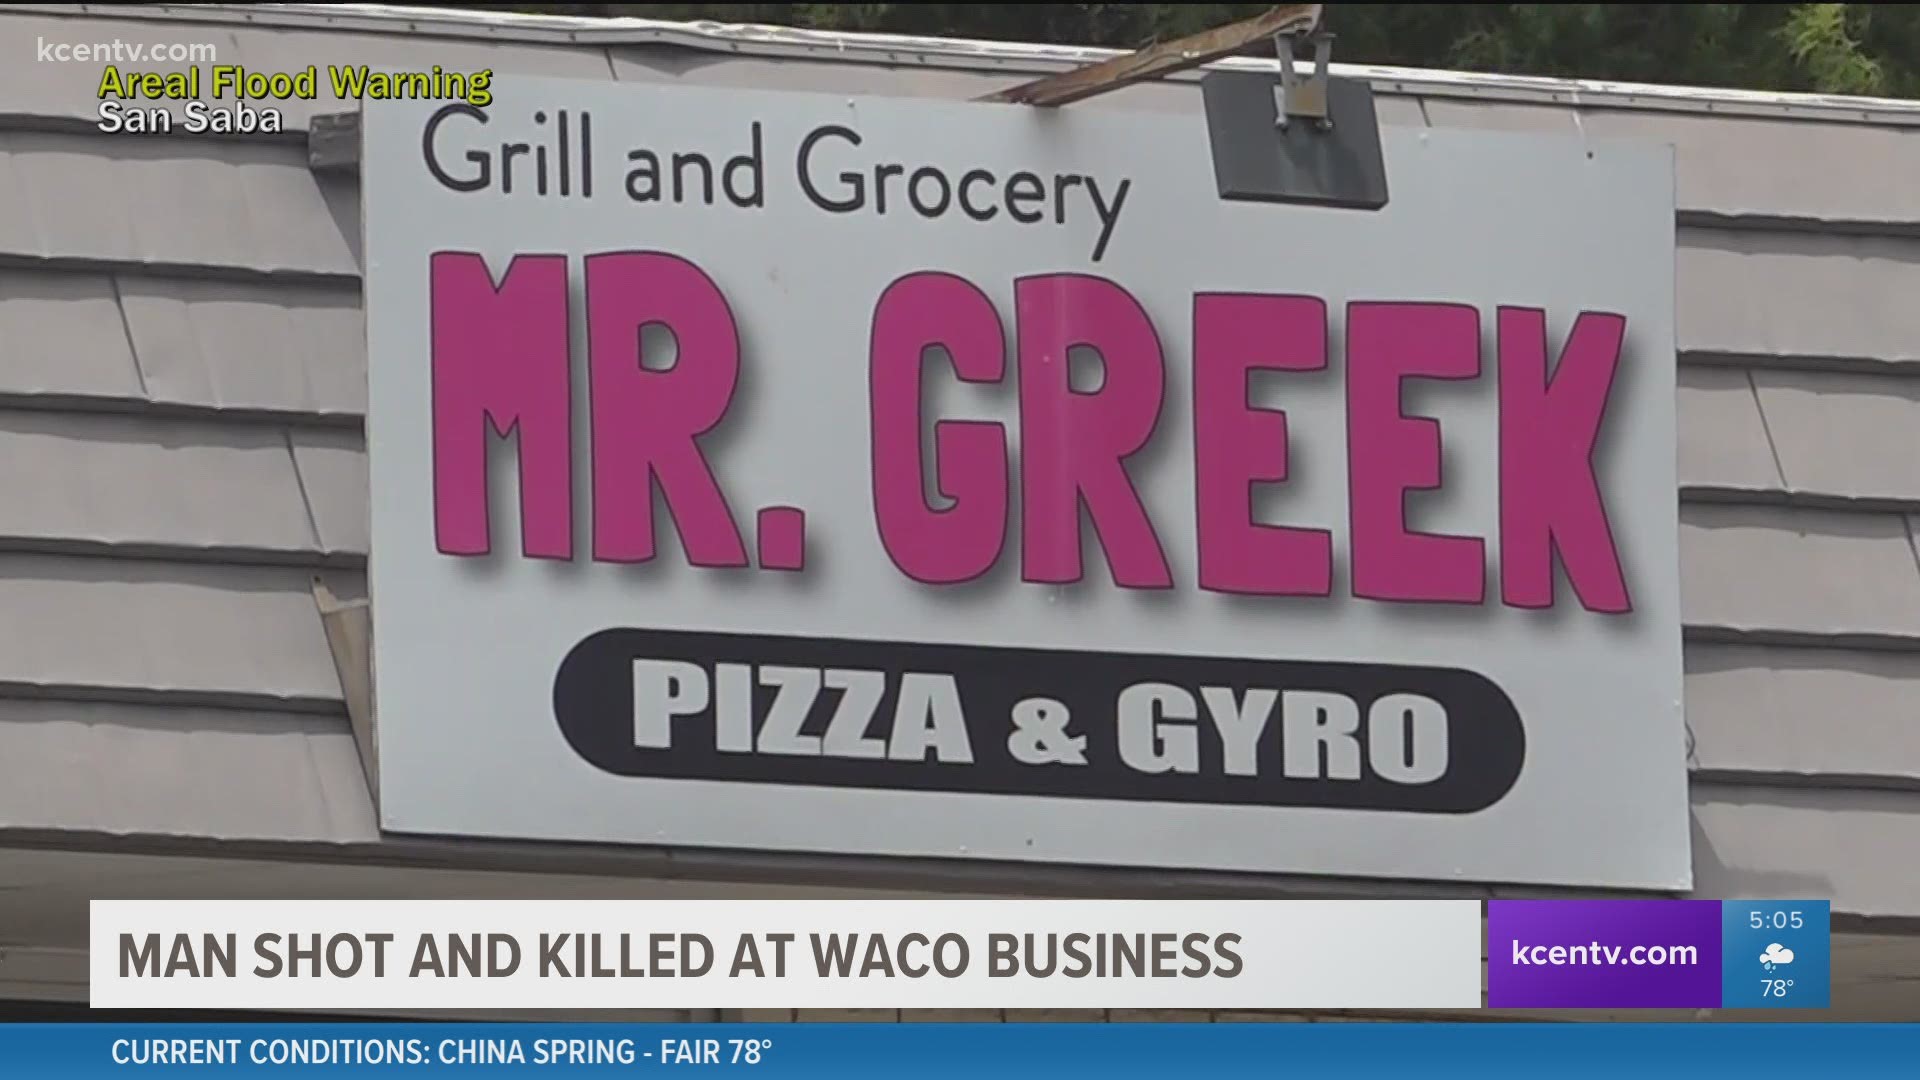 Officials said the shooting at Mr. Greek Grill and Grocery is now being investigated as capital murder.